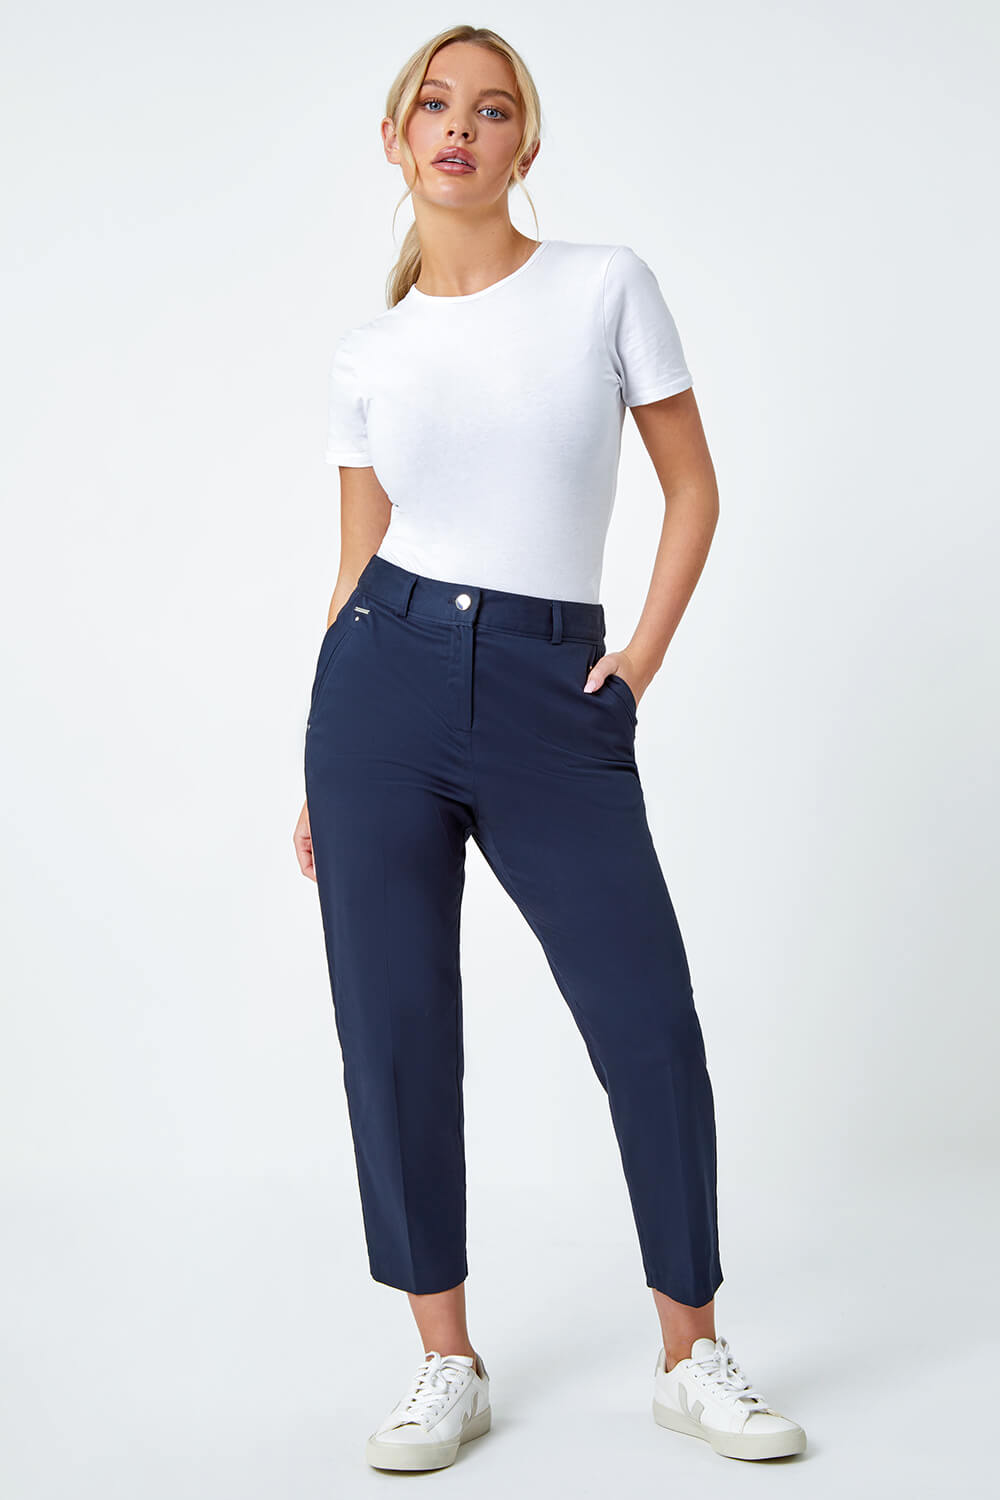 Navy  Petite Cotton Blend Stretch Trousers, Image 2 of 5